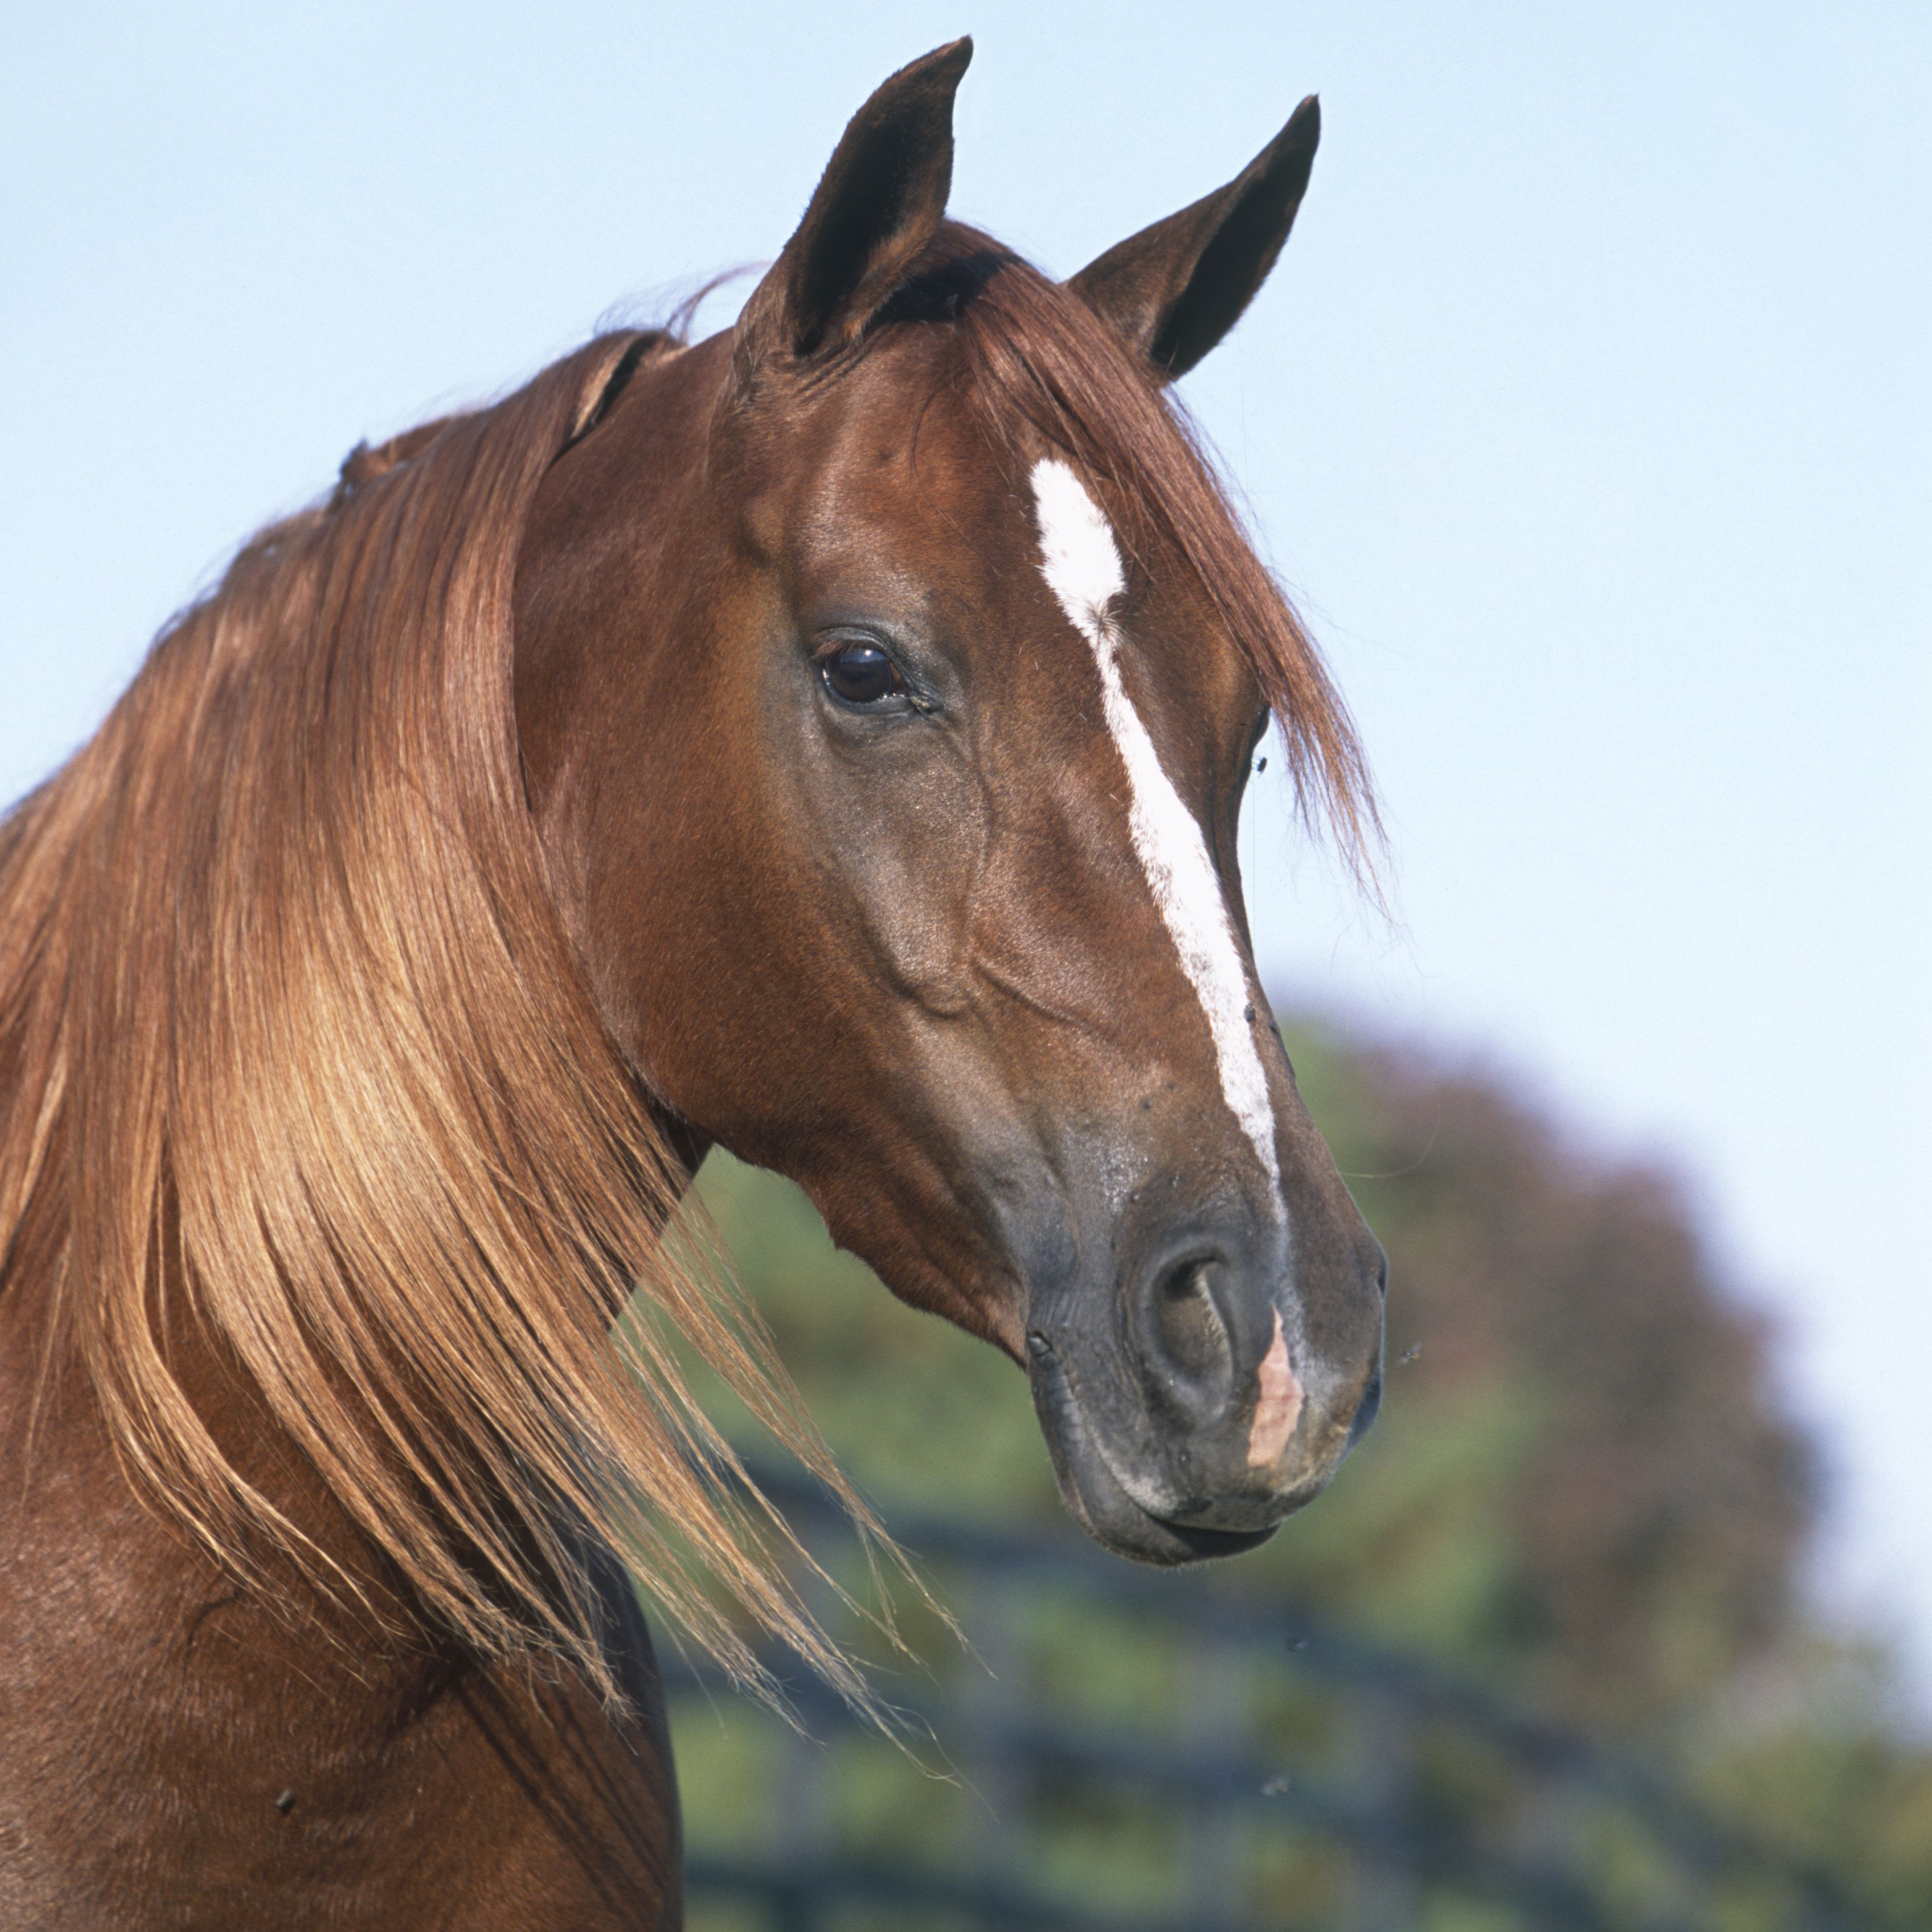 Head of chestnut Morab horse showing Arabian characteristics, white blaze and long, flowing mane